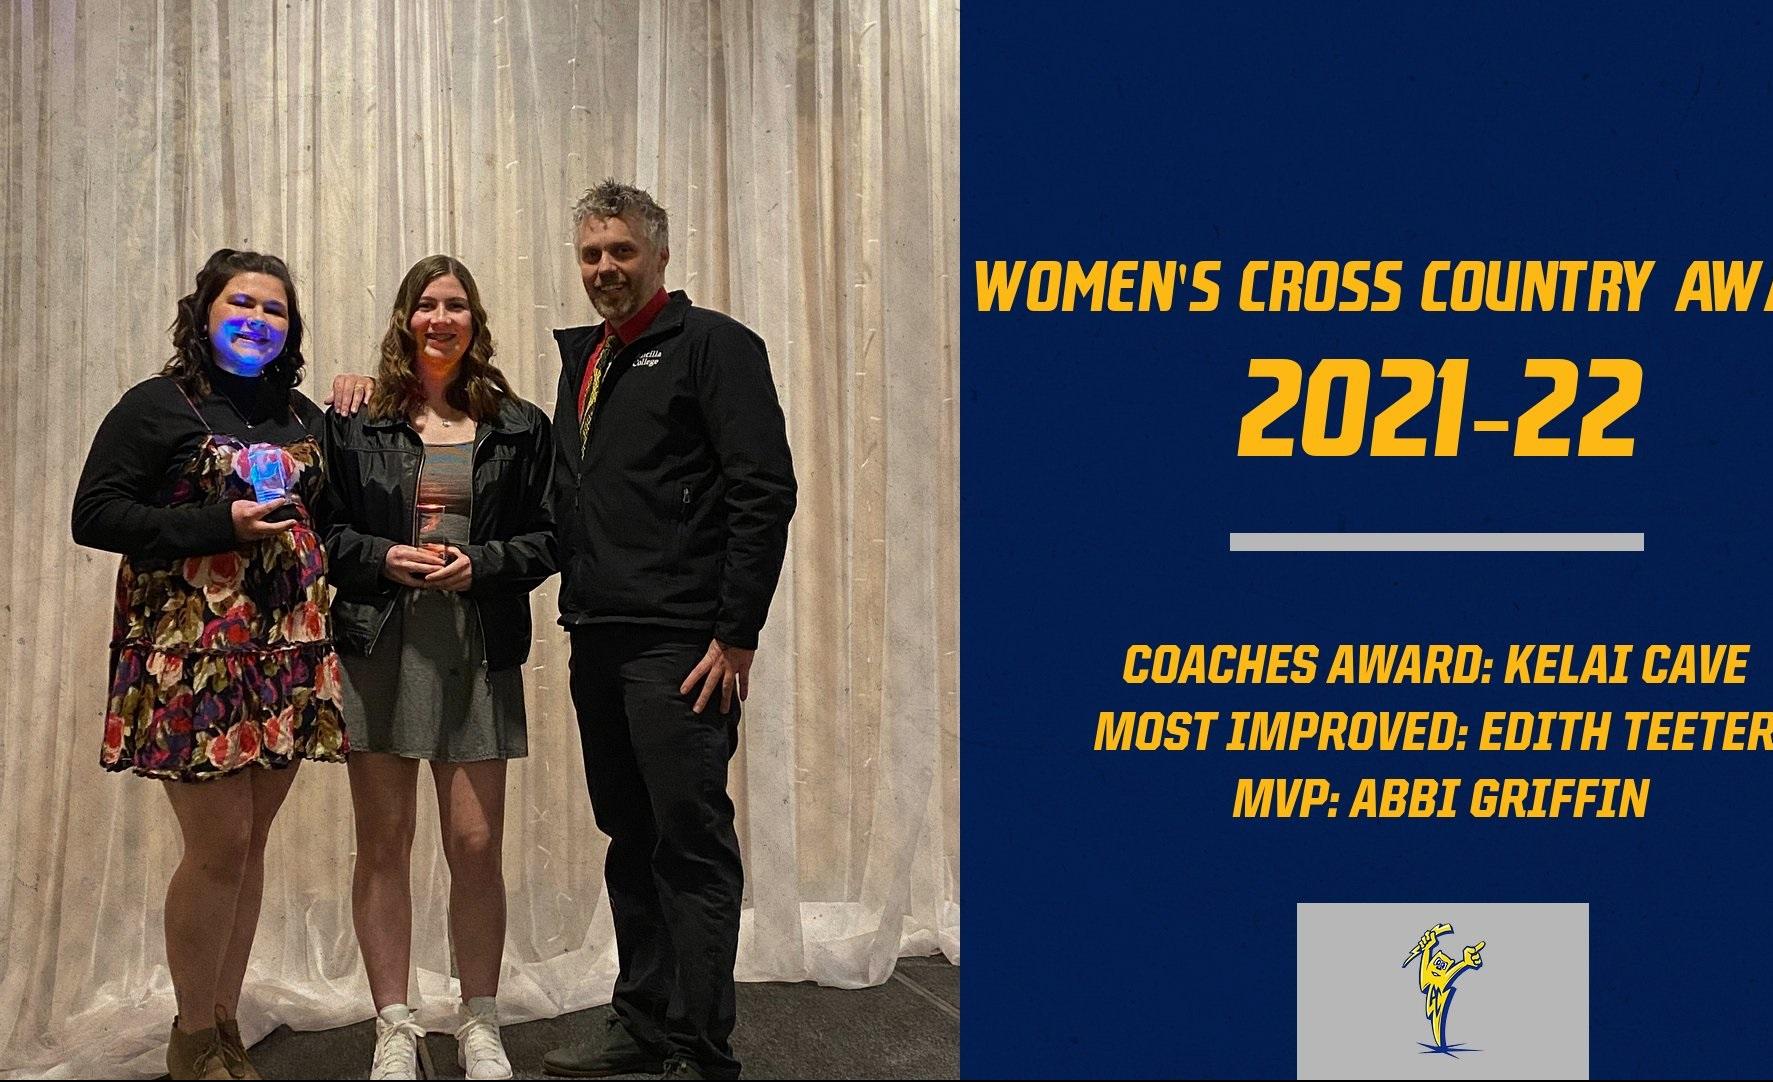 Women's Cross Country Athletic Awards